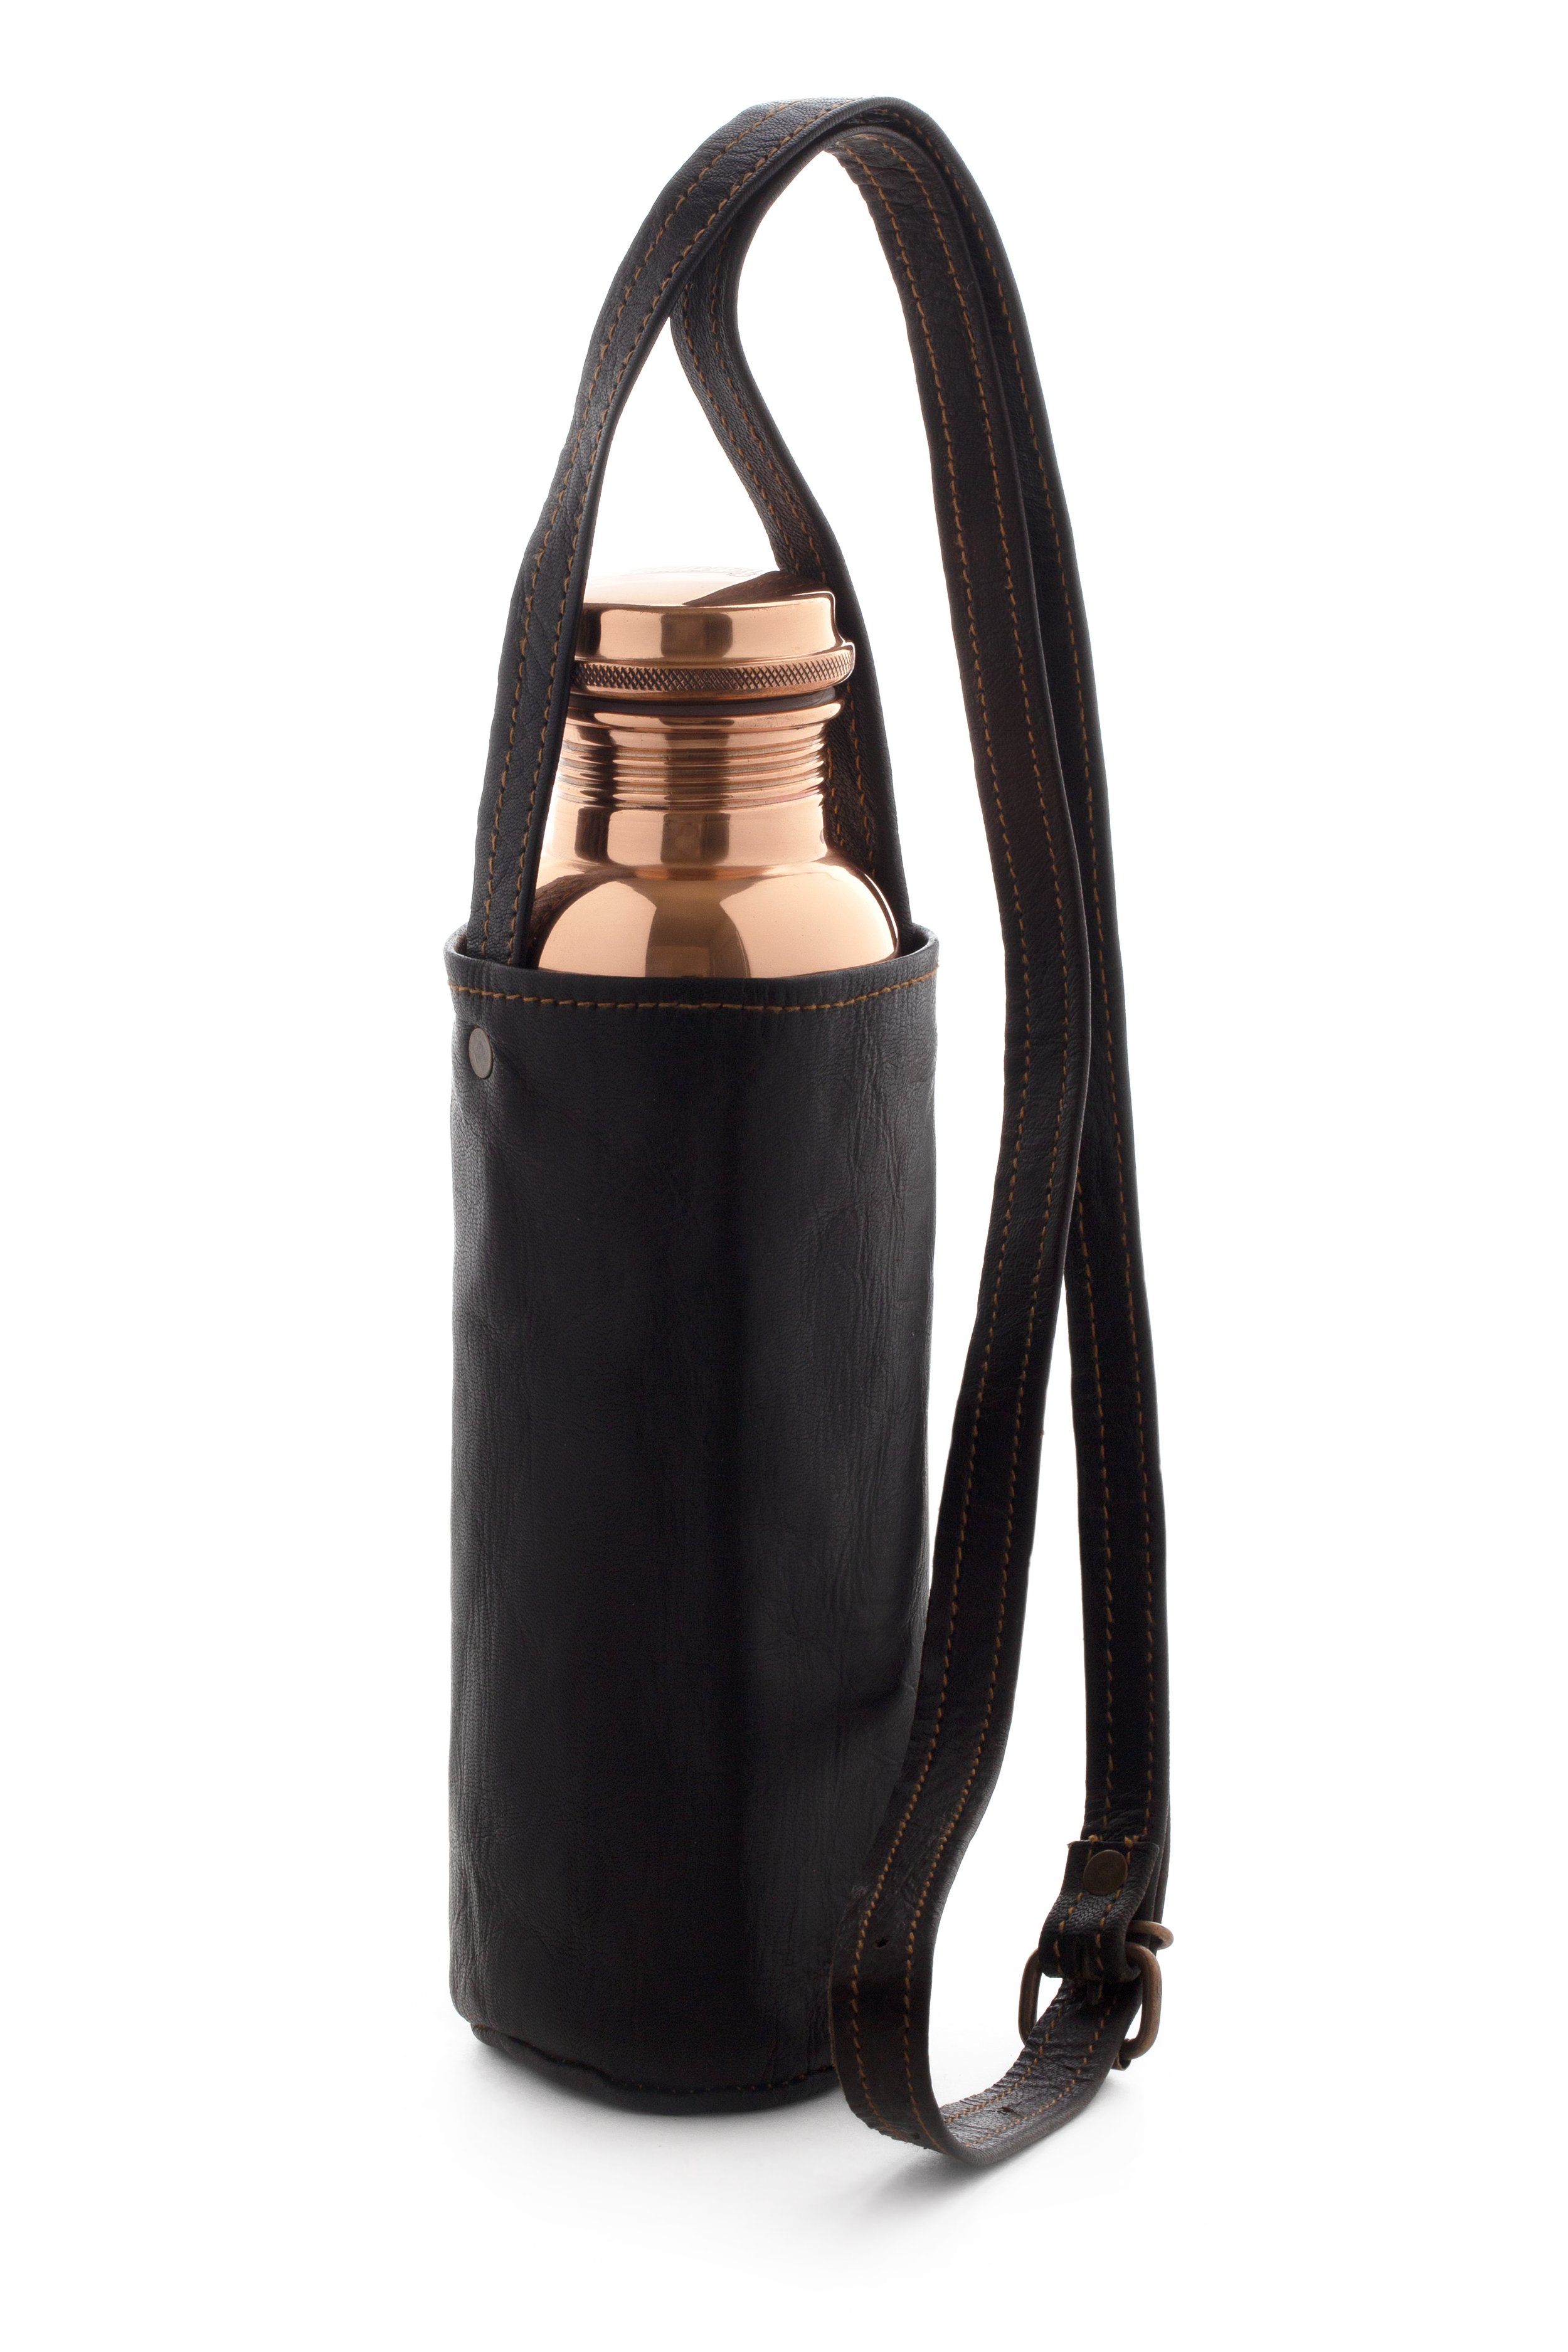 Leather water bottle holder with strap and glass bottle